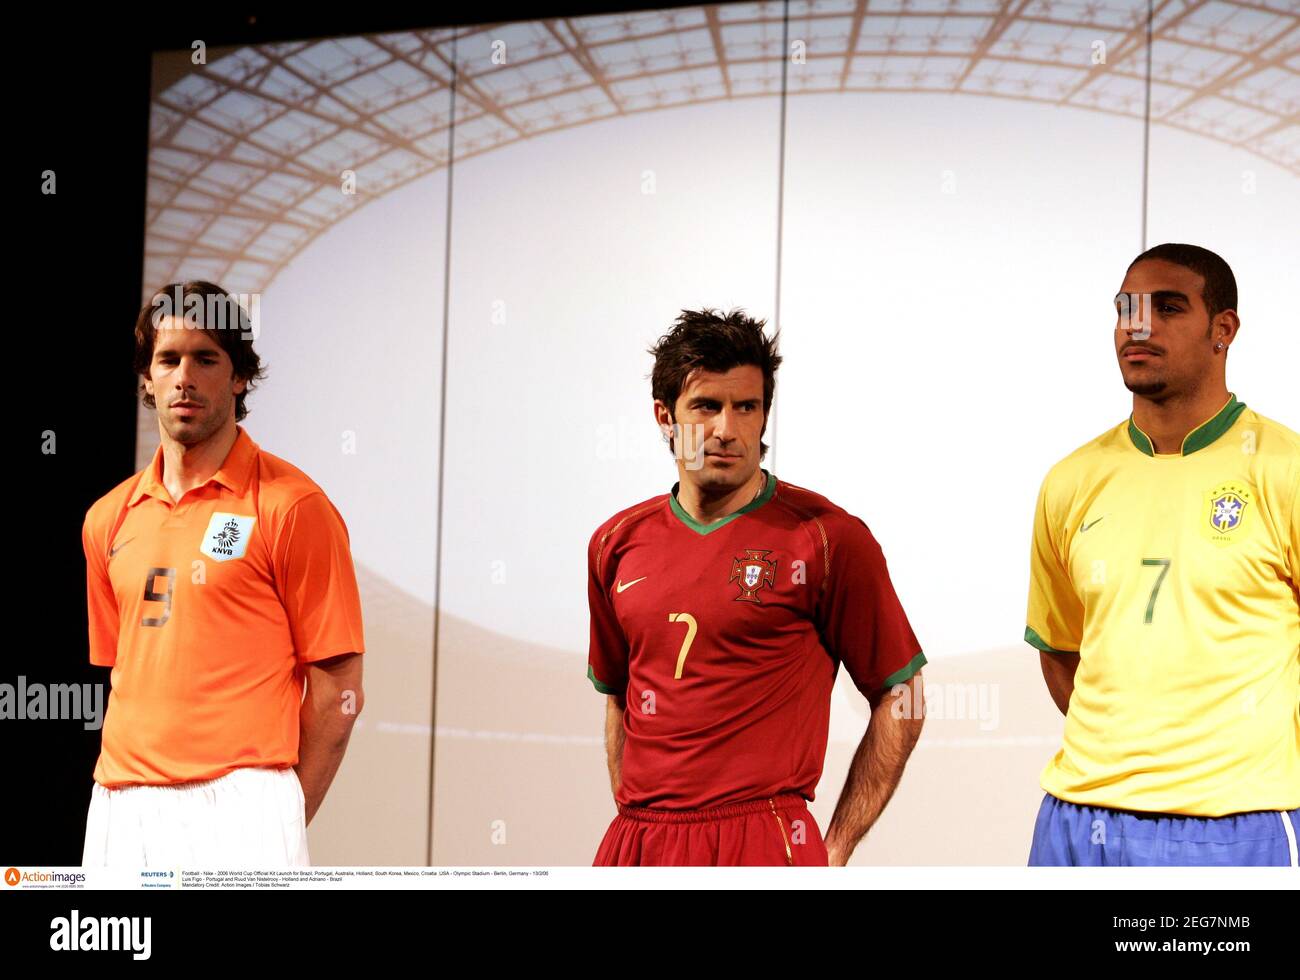 Football - Nike - 2006 World Cup Official Kit Launch for Brazil, Portugal, Australia, Holland, South Korea, Mexico, Croatia & USA - Olympic Stadium - Berlin, Germany - 13/2/06  Luis Figo - Portugal and Ruud Van Nistelrooy - Holland and Adriano - Brazil  Mandatory Credit: Action Images / Tobias Schwarz Stock Photo